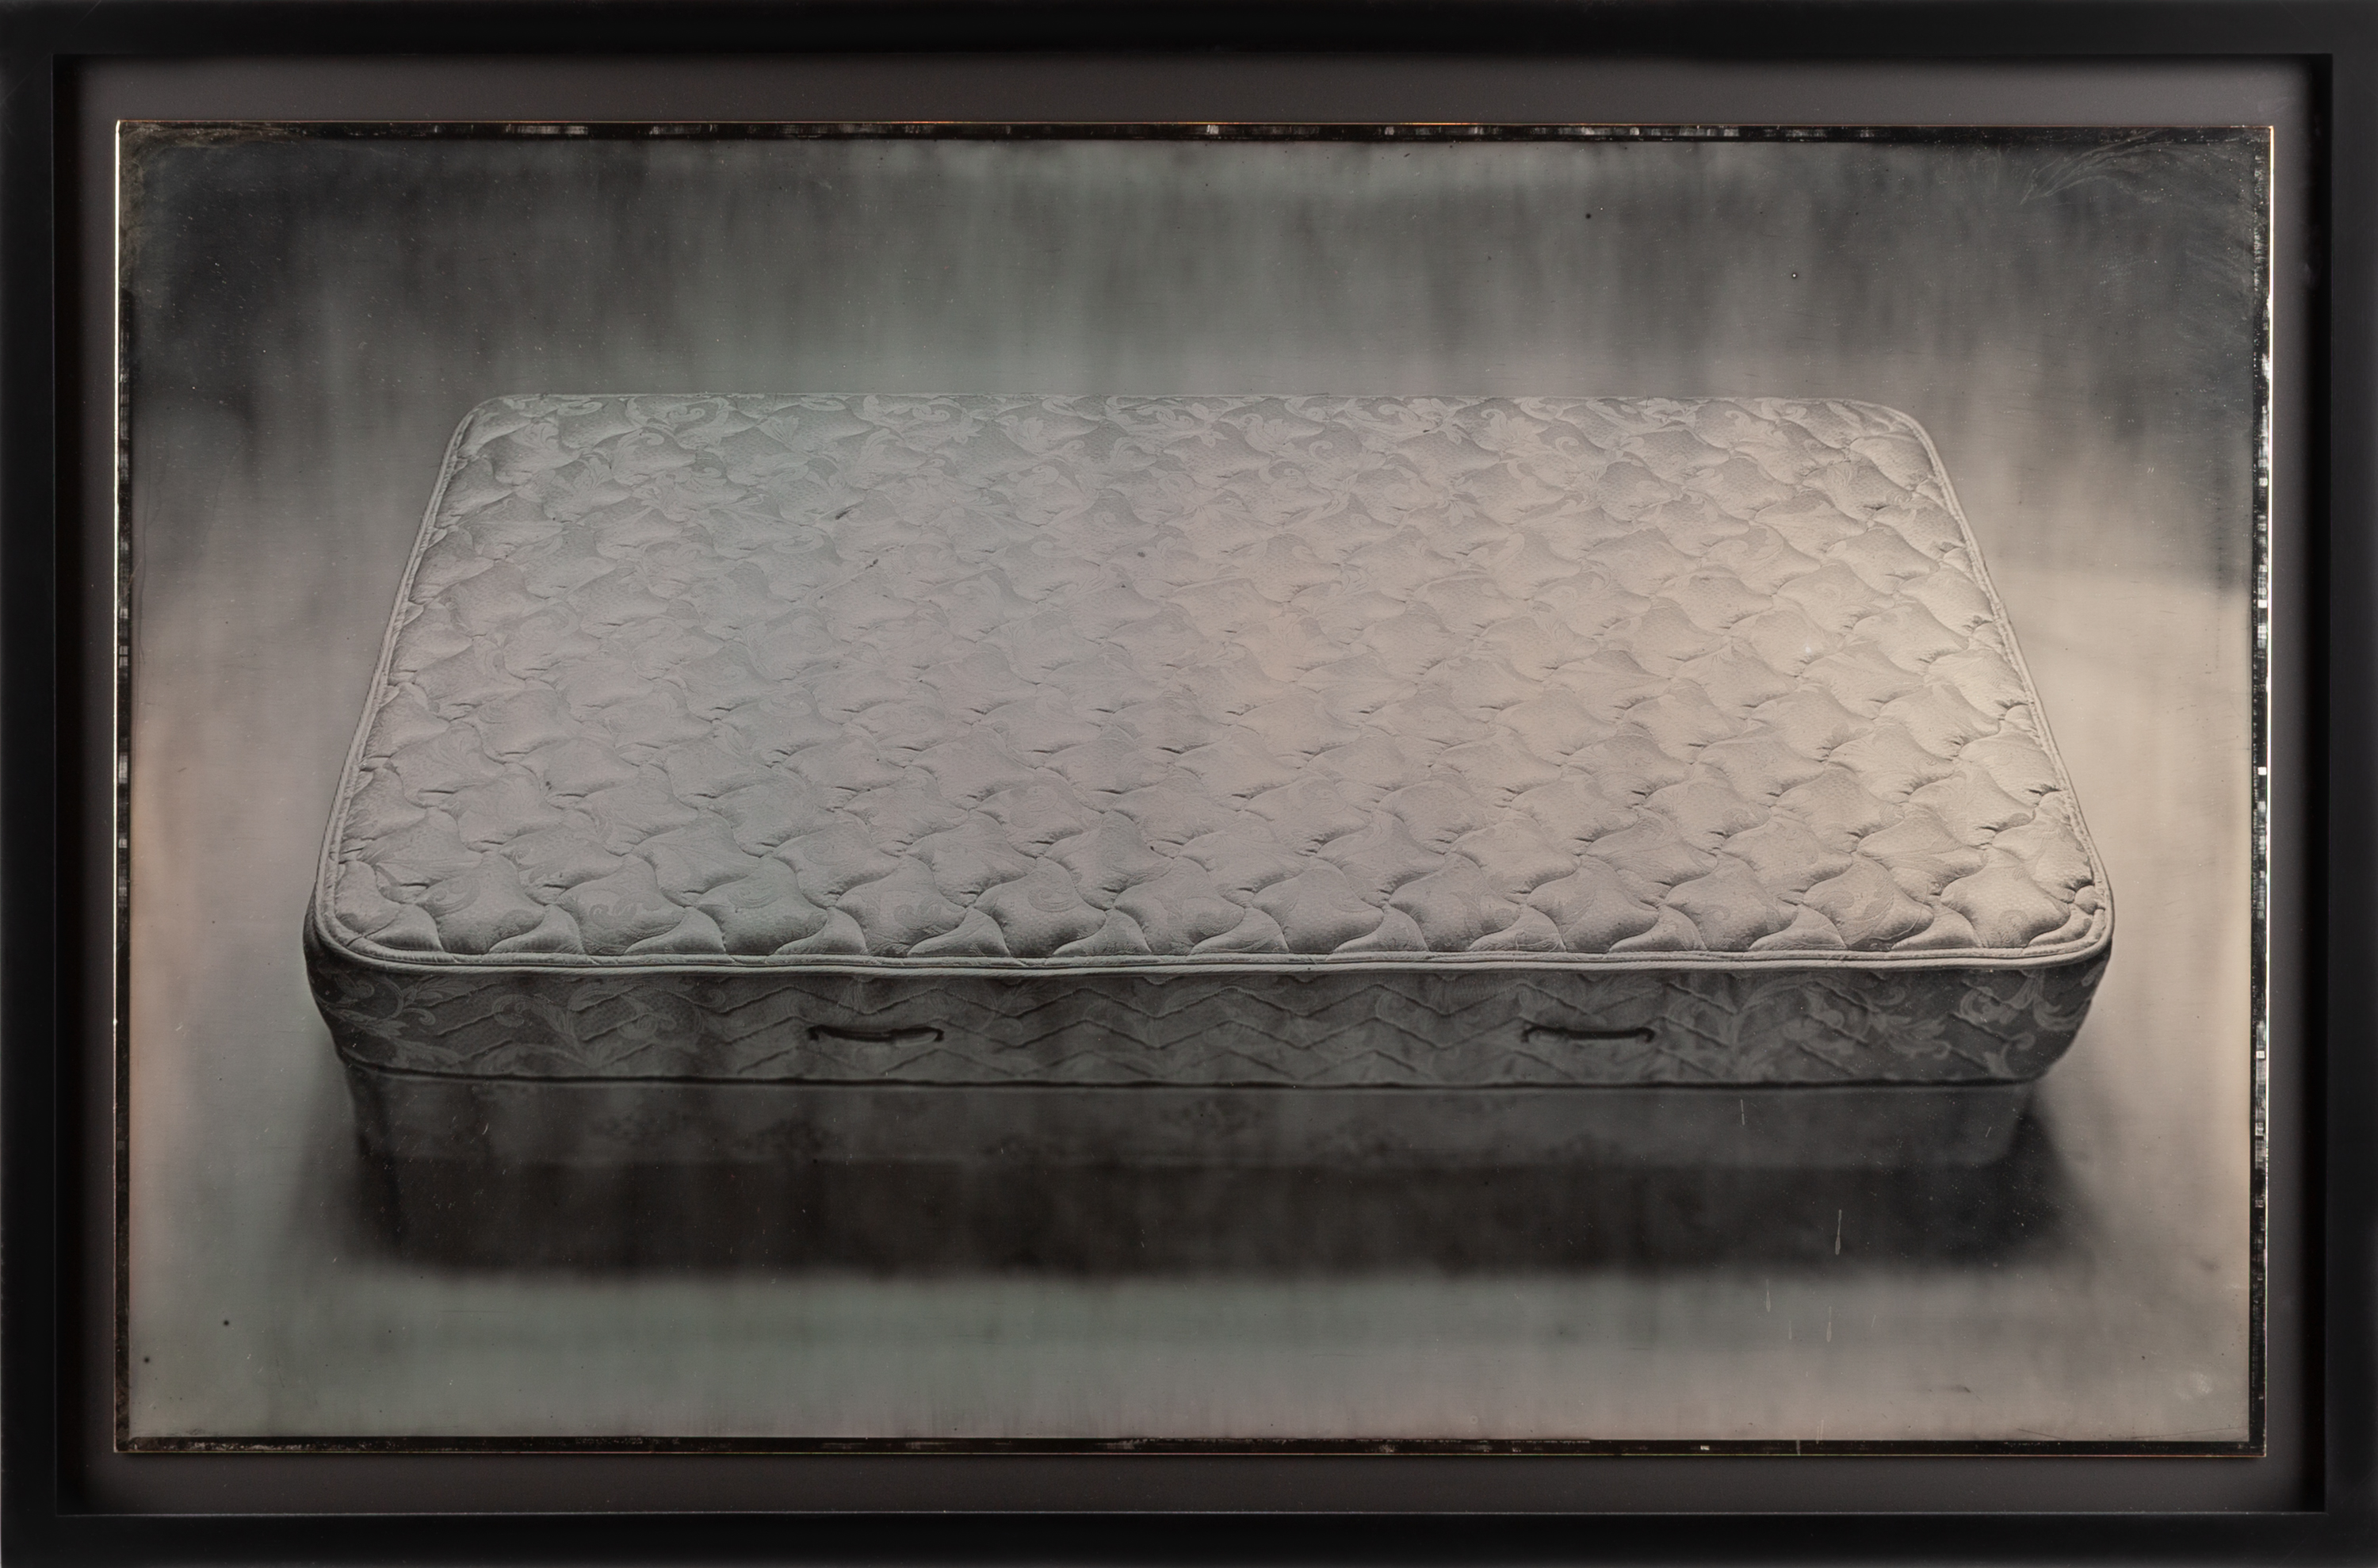 Color image of a daguerreotype depicting a a mattress framed in black